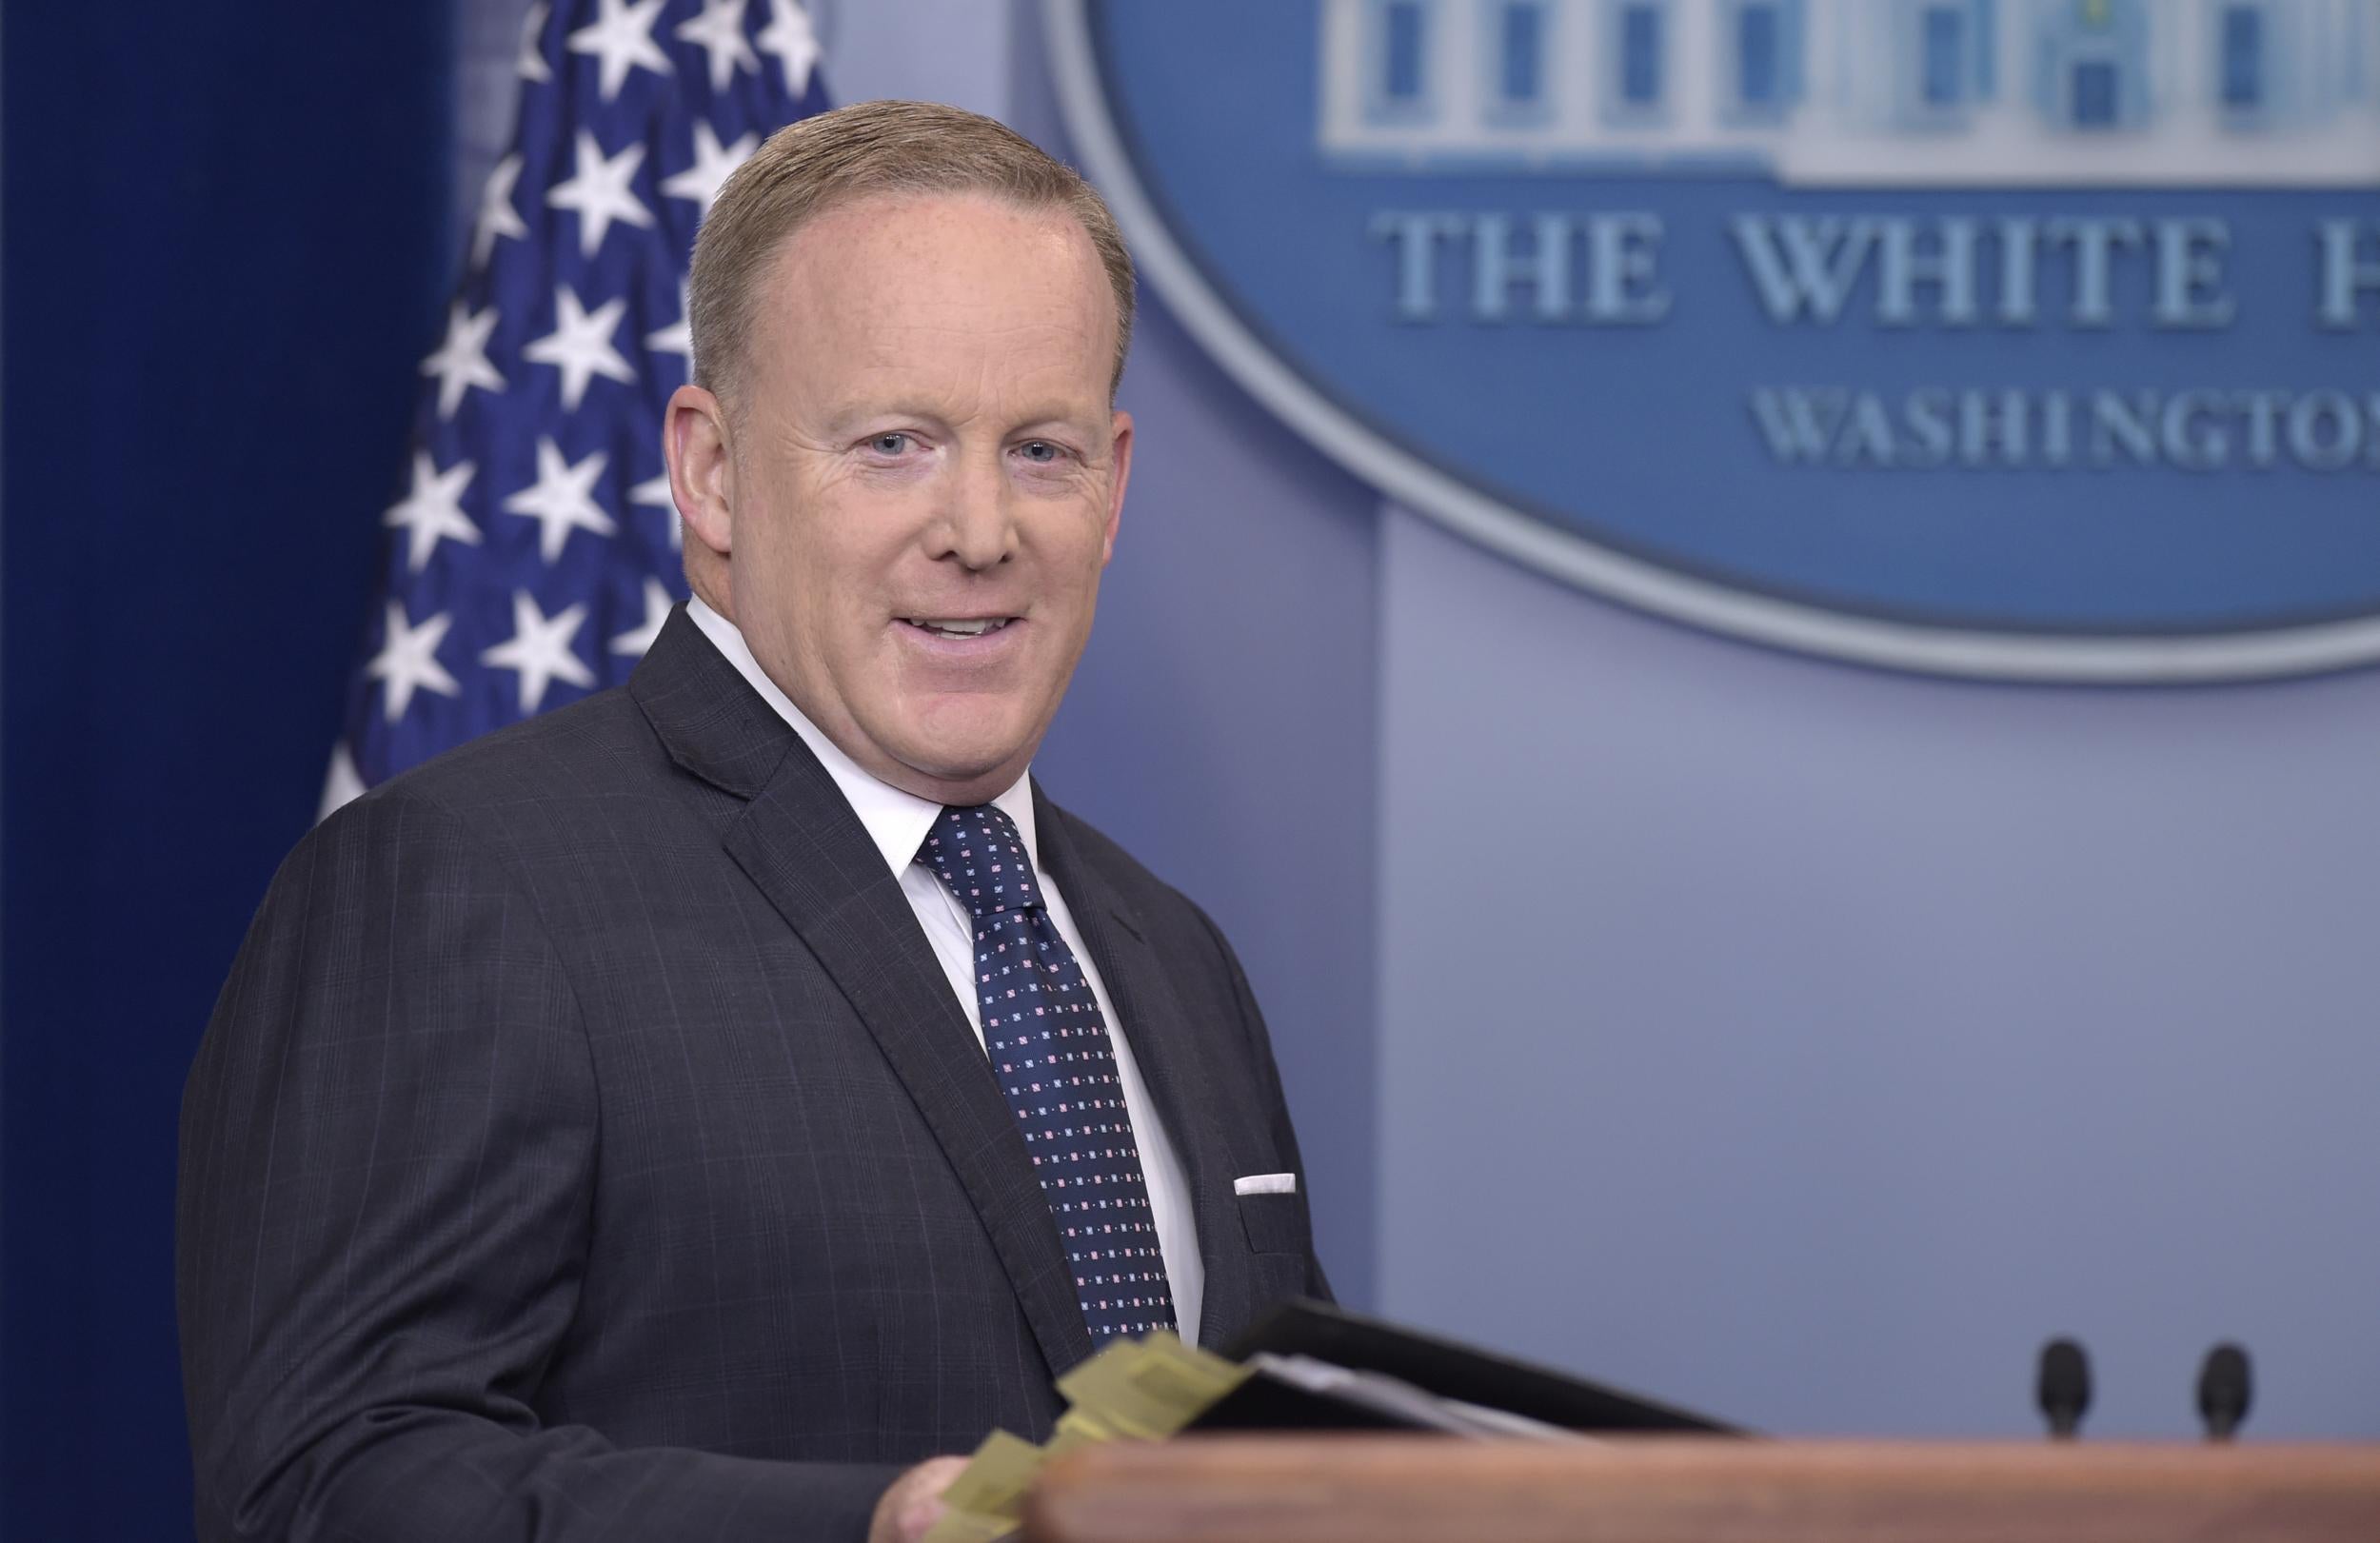 Sean Spicer is doing nicely on £136,394 a year